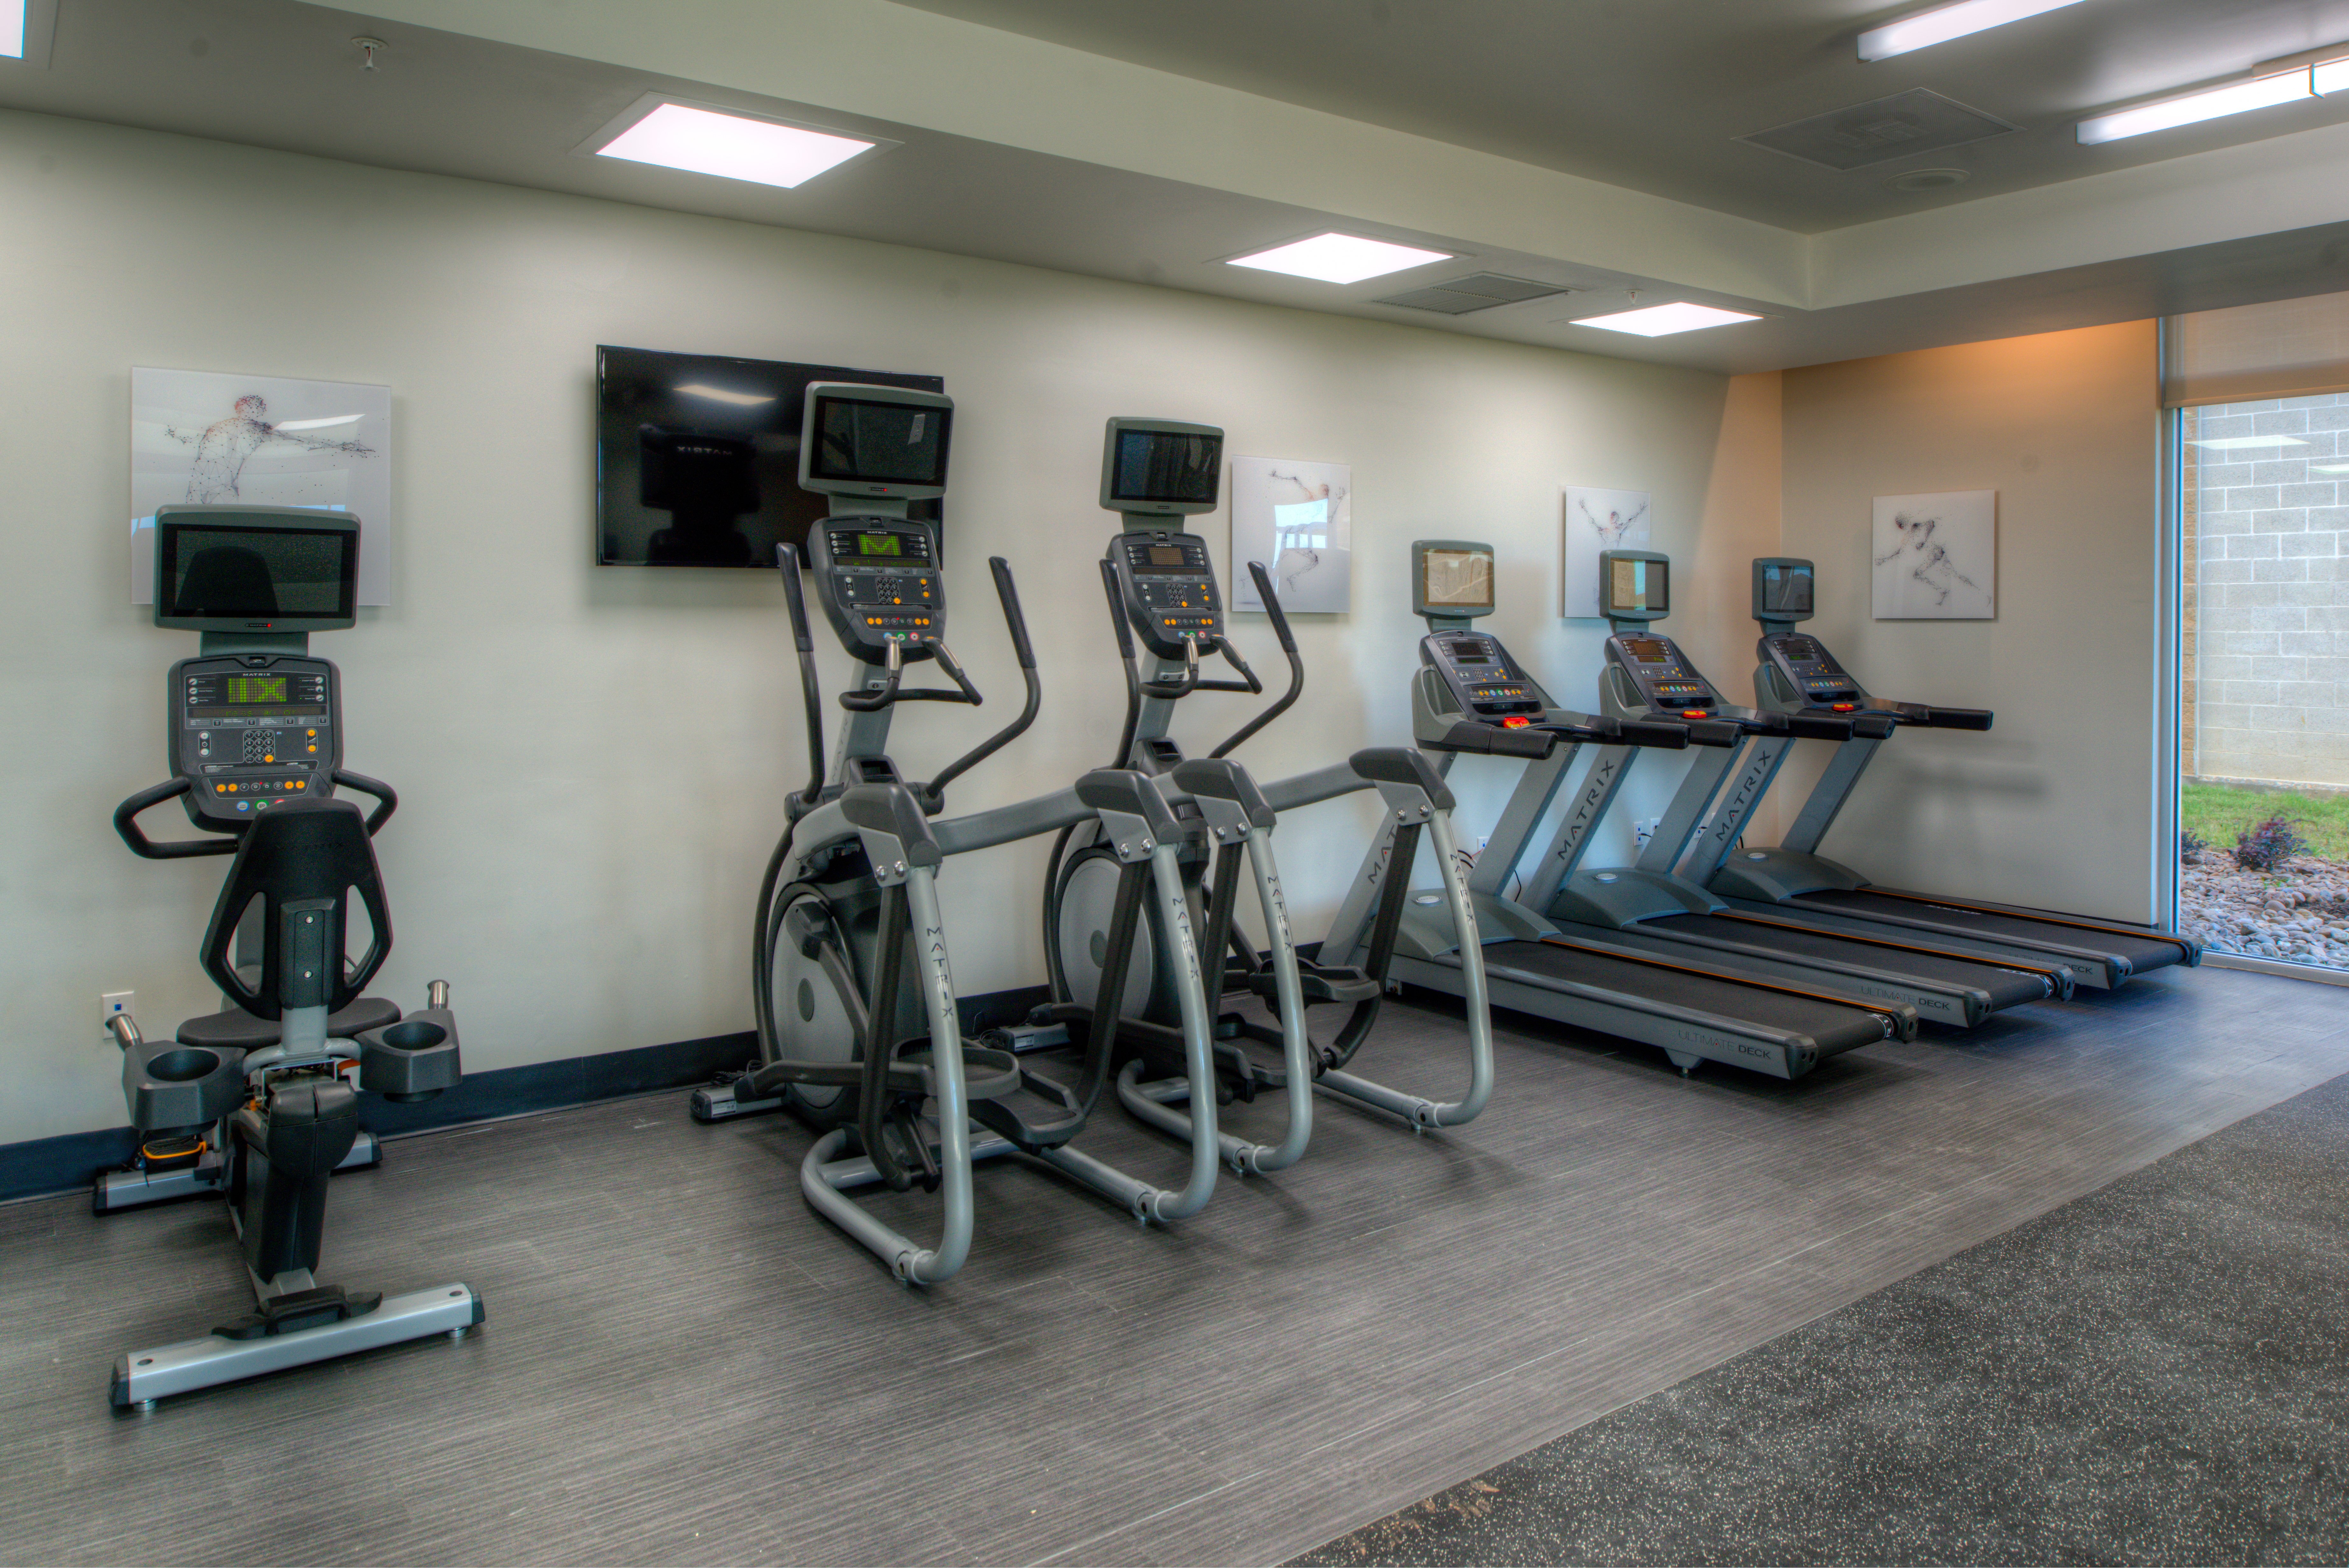 Maintain a workout routine at hotel fitness center on 1st floor